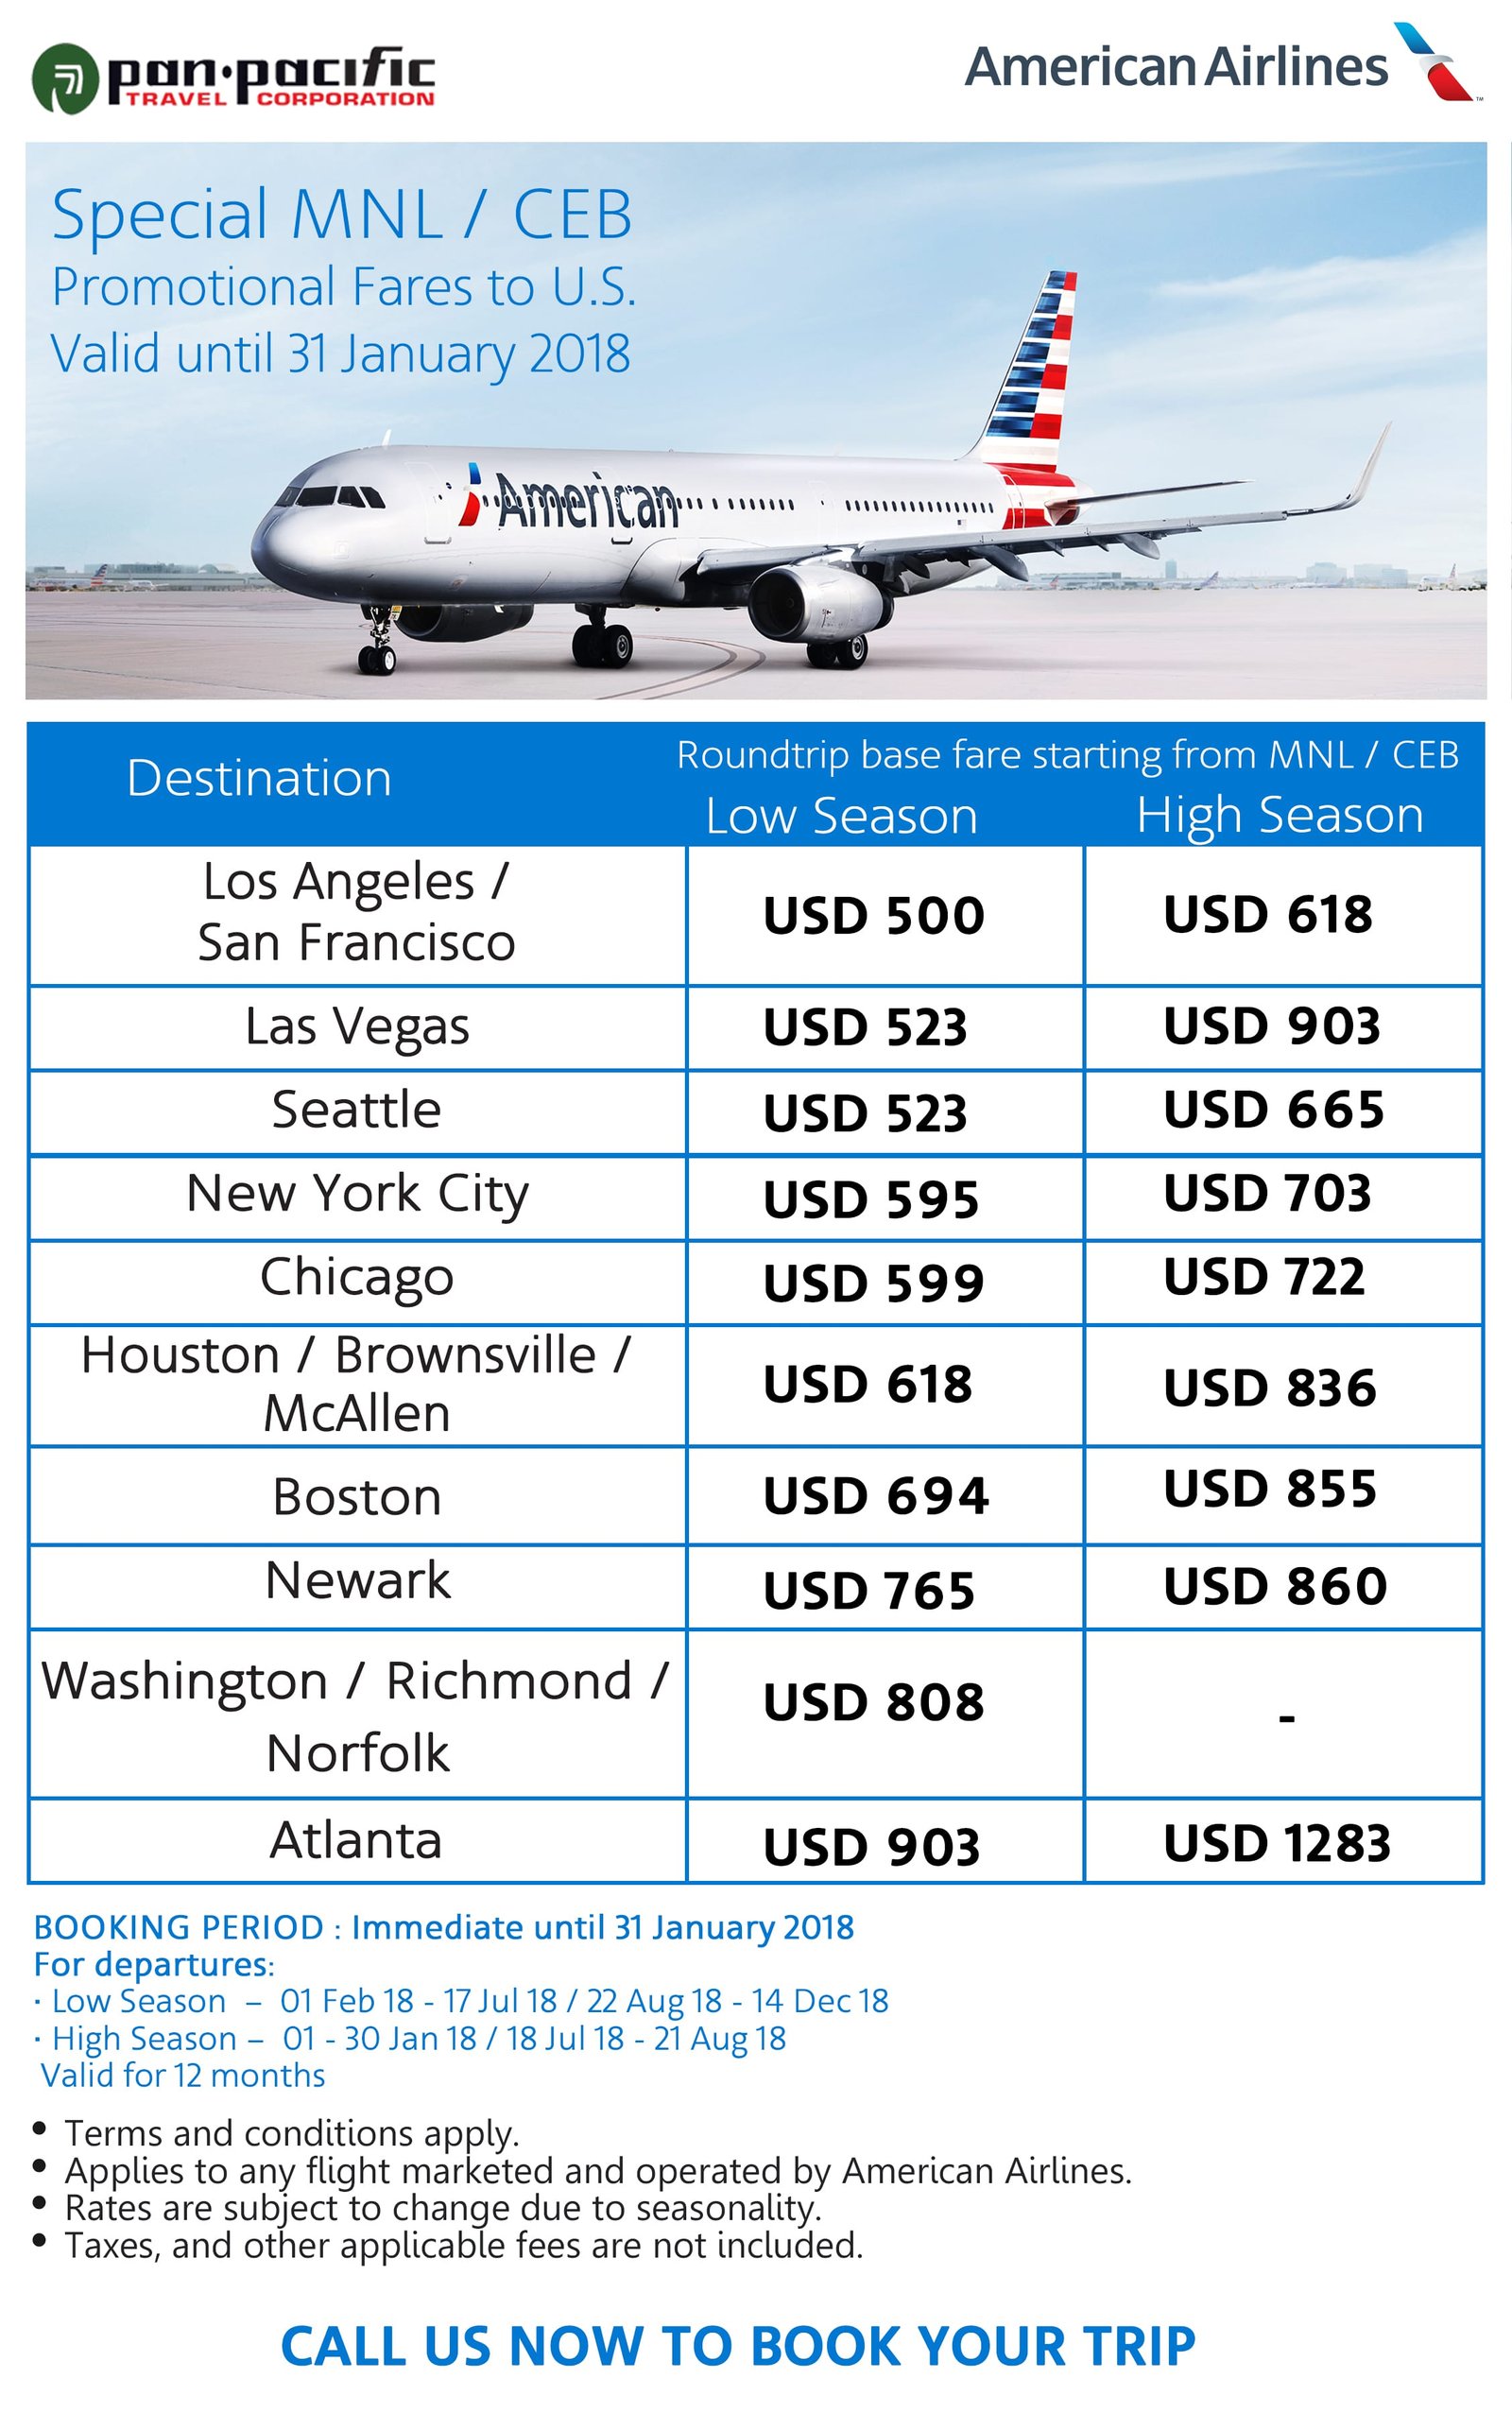 American Airlines Promotion Pan Pacific Travel